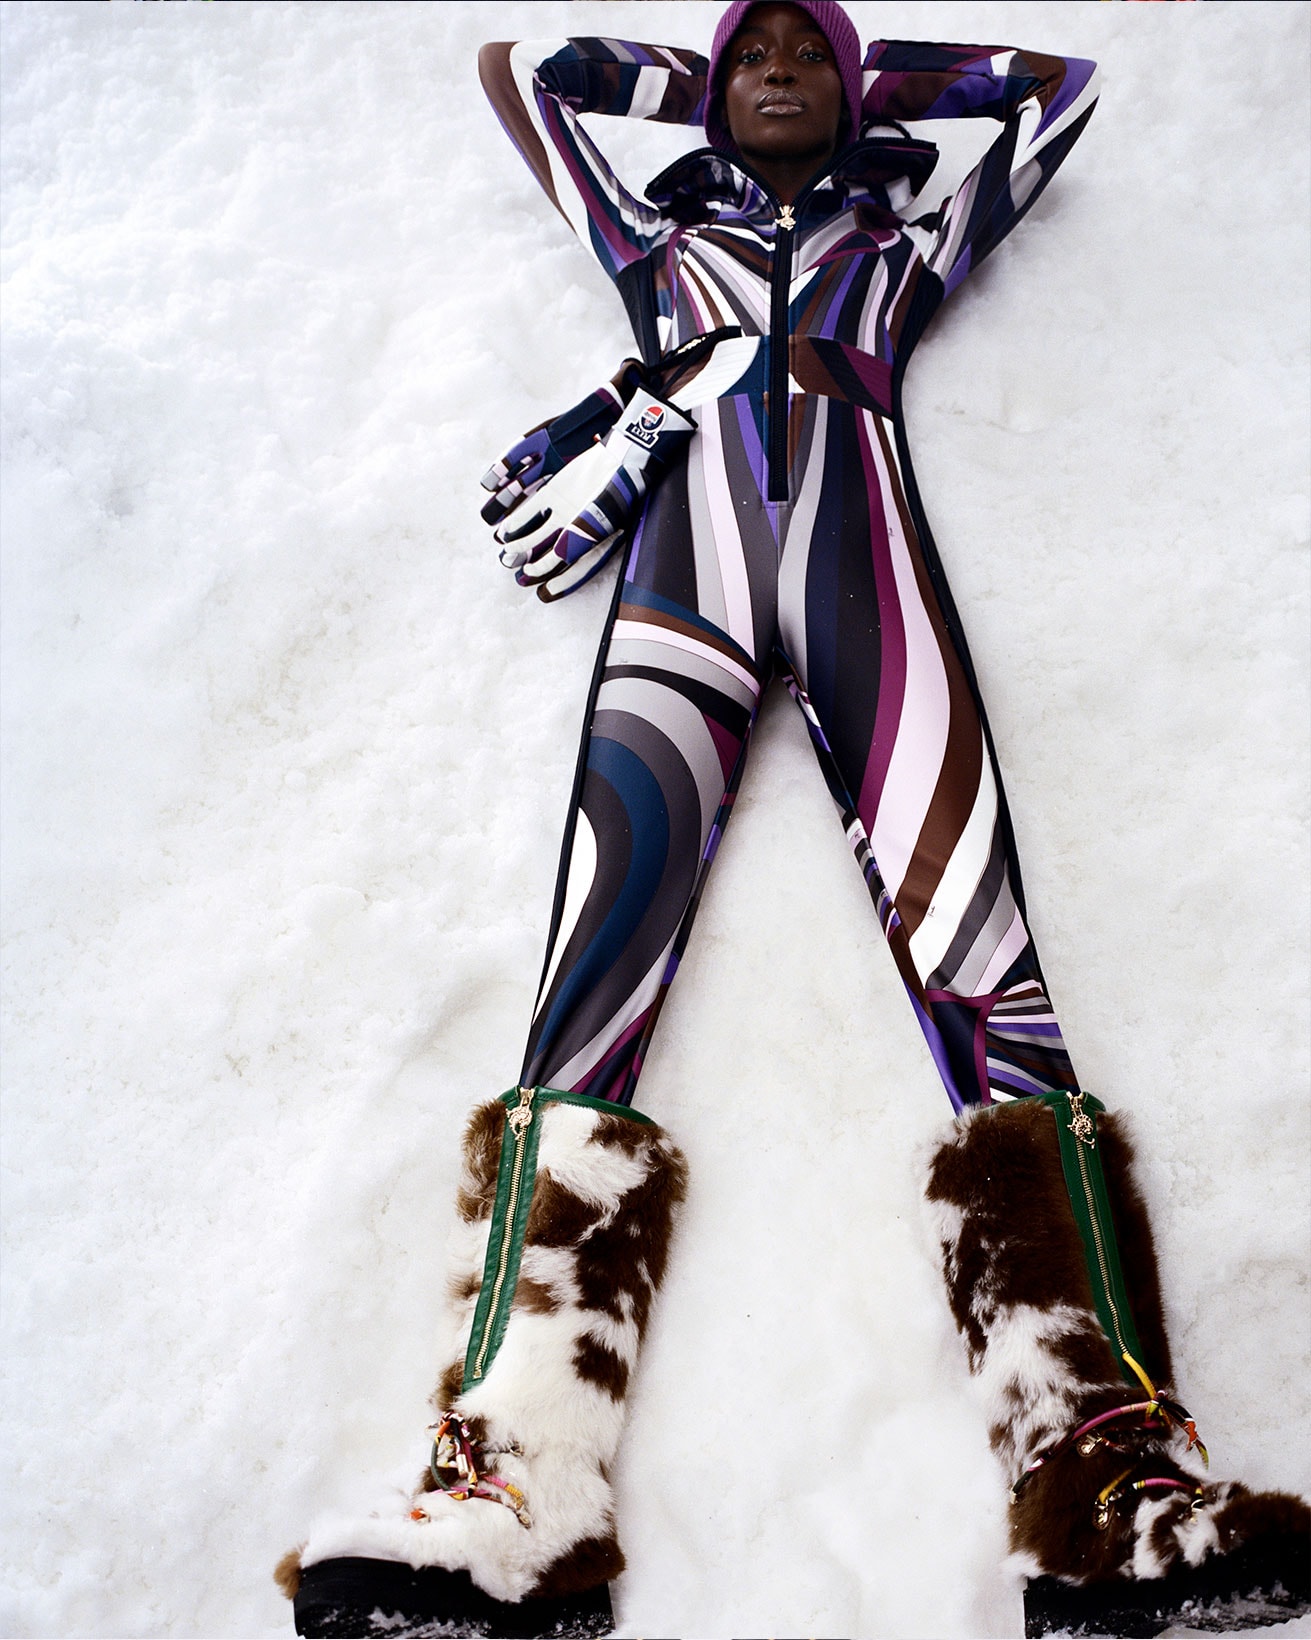 Emilio Pucci Fusalp Skiwear 70s Glamorous Inspired Jackets Pants Release Info